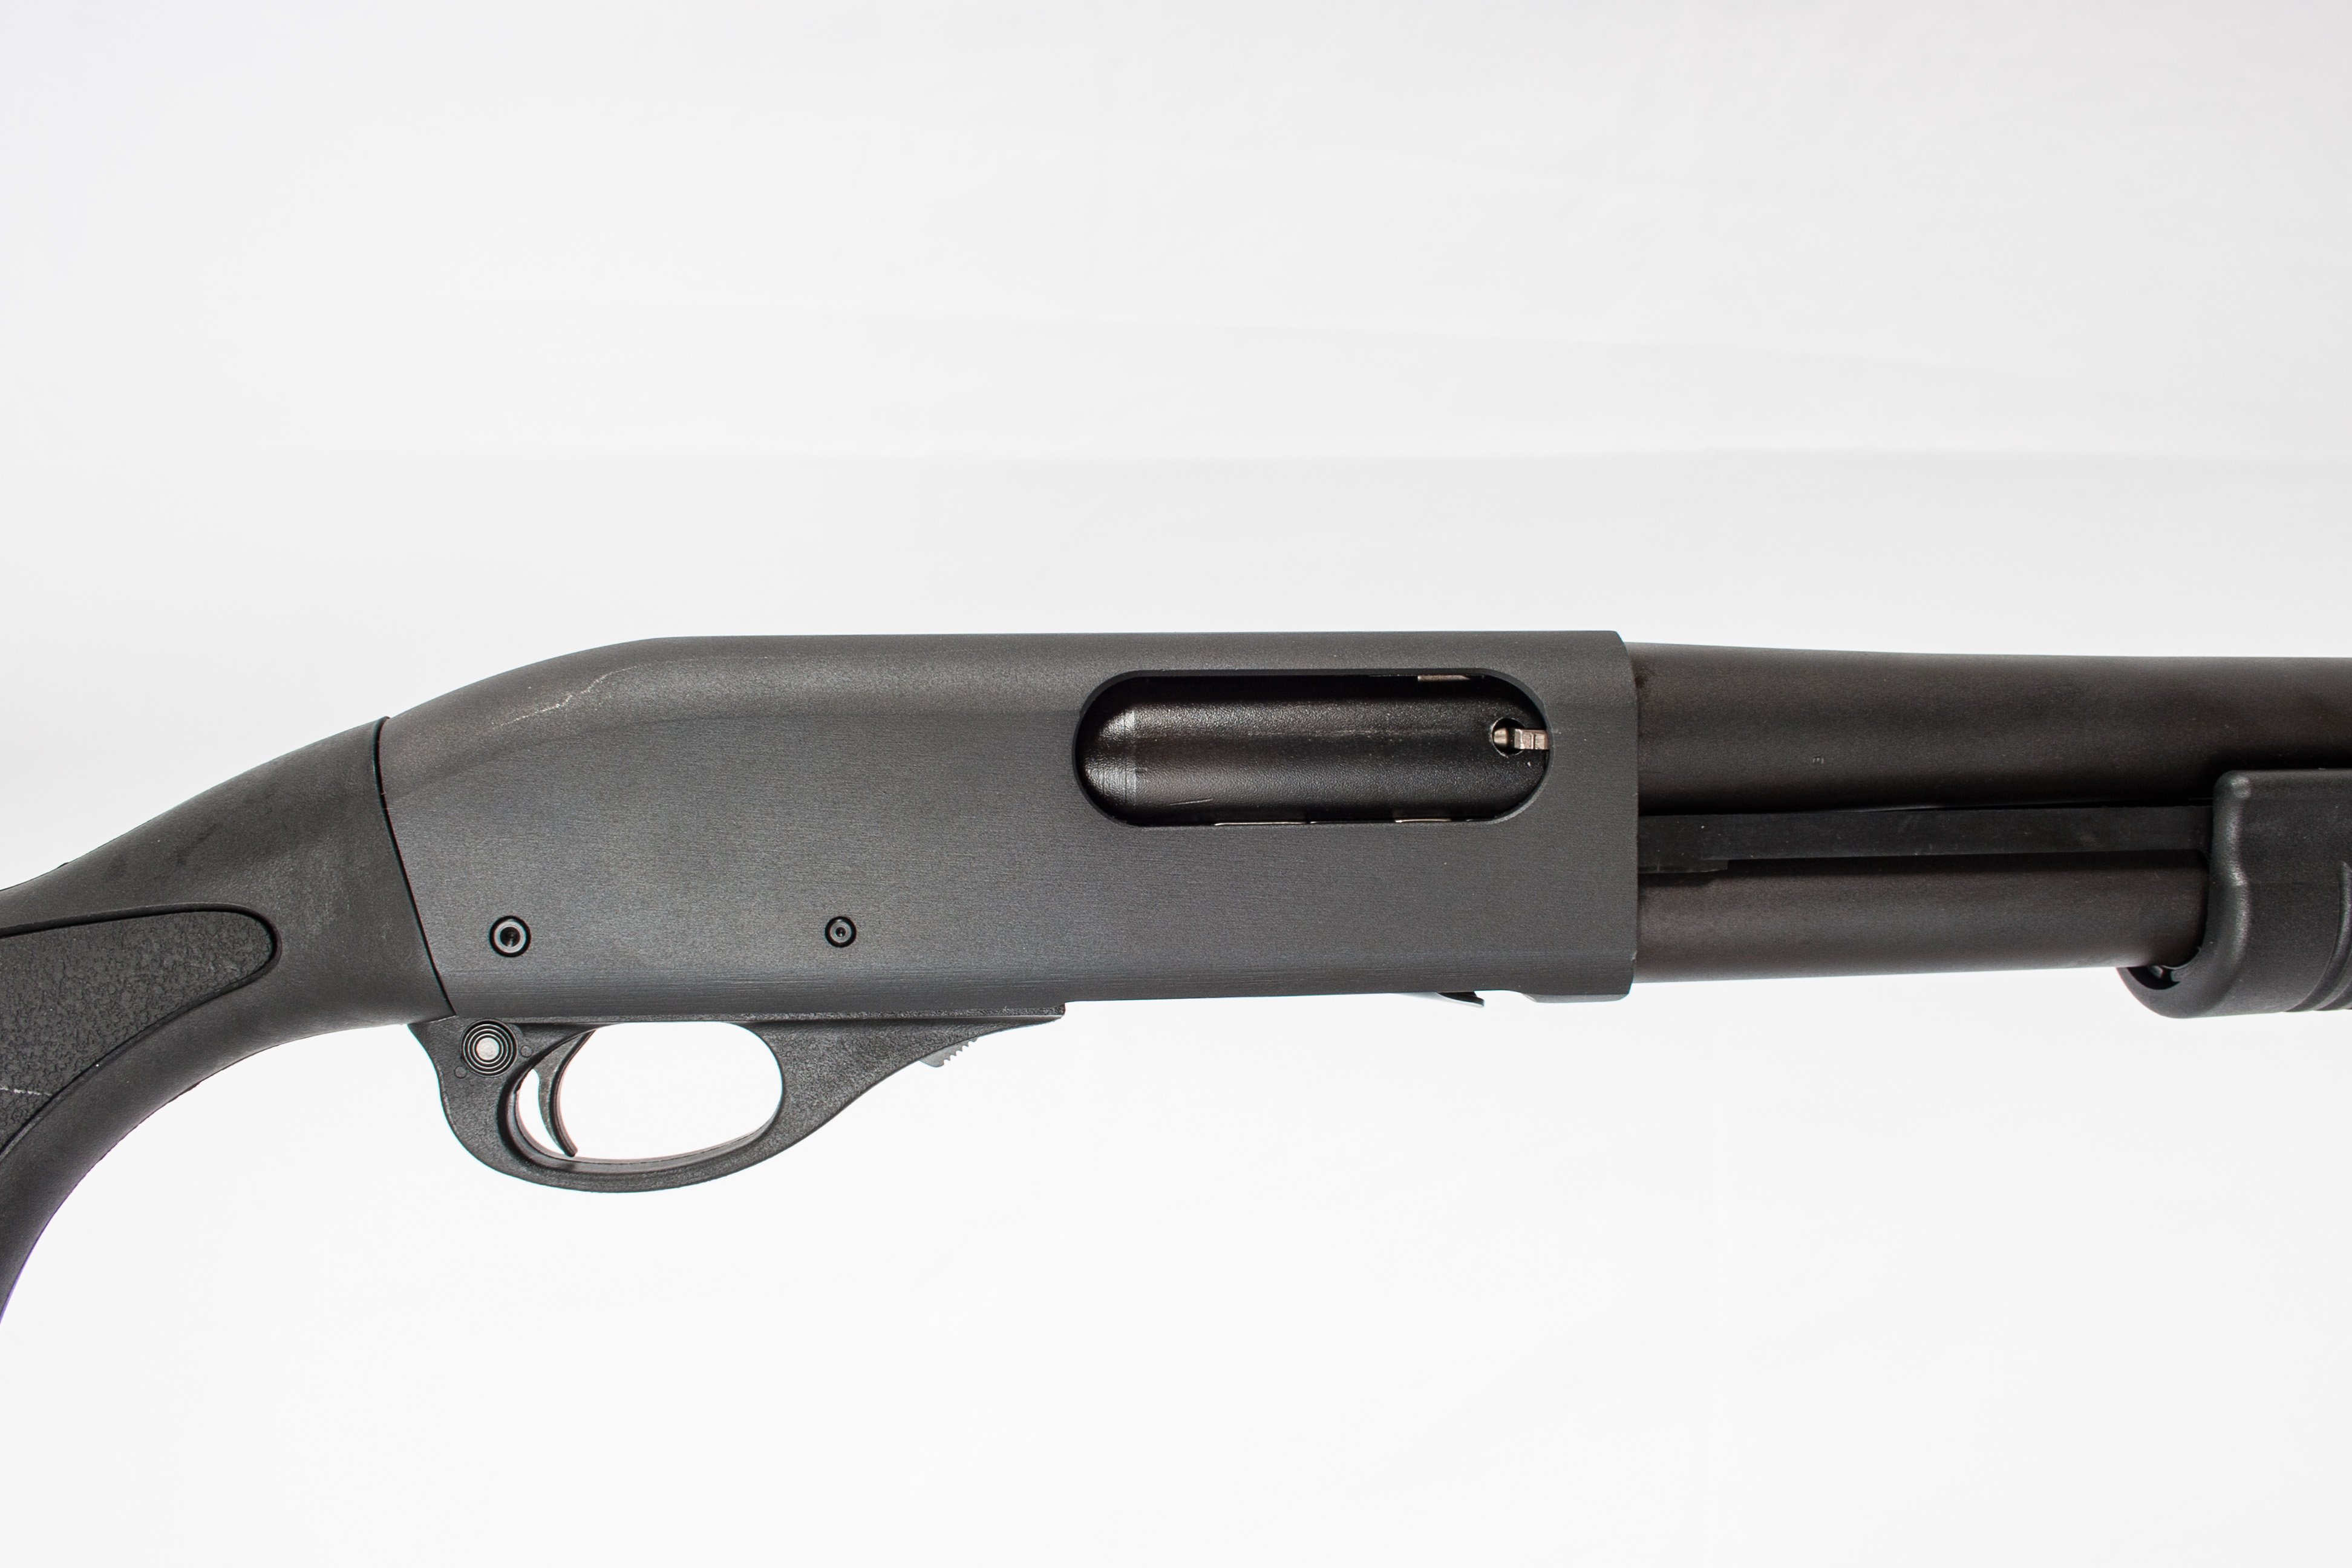 The receiver of Remington 870 TAC, chambered for 12 gauge 